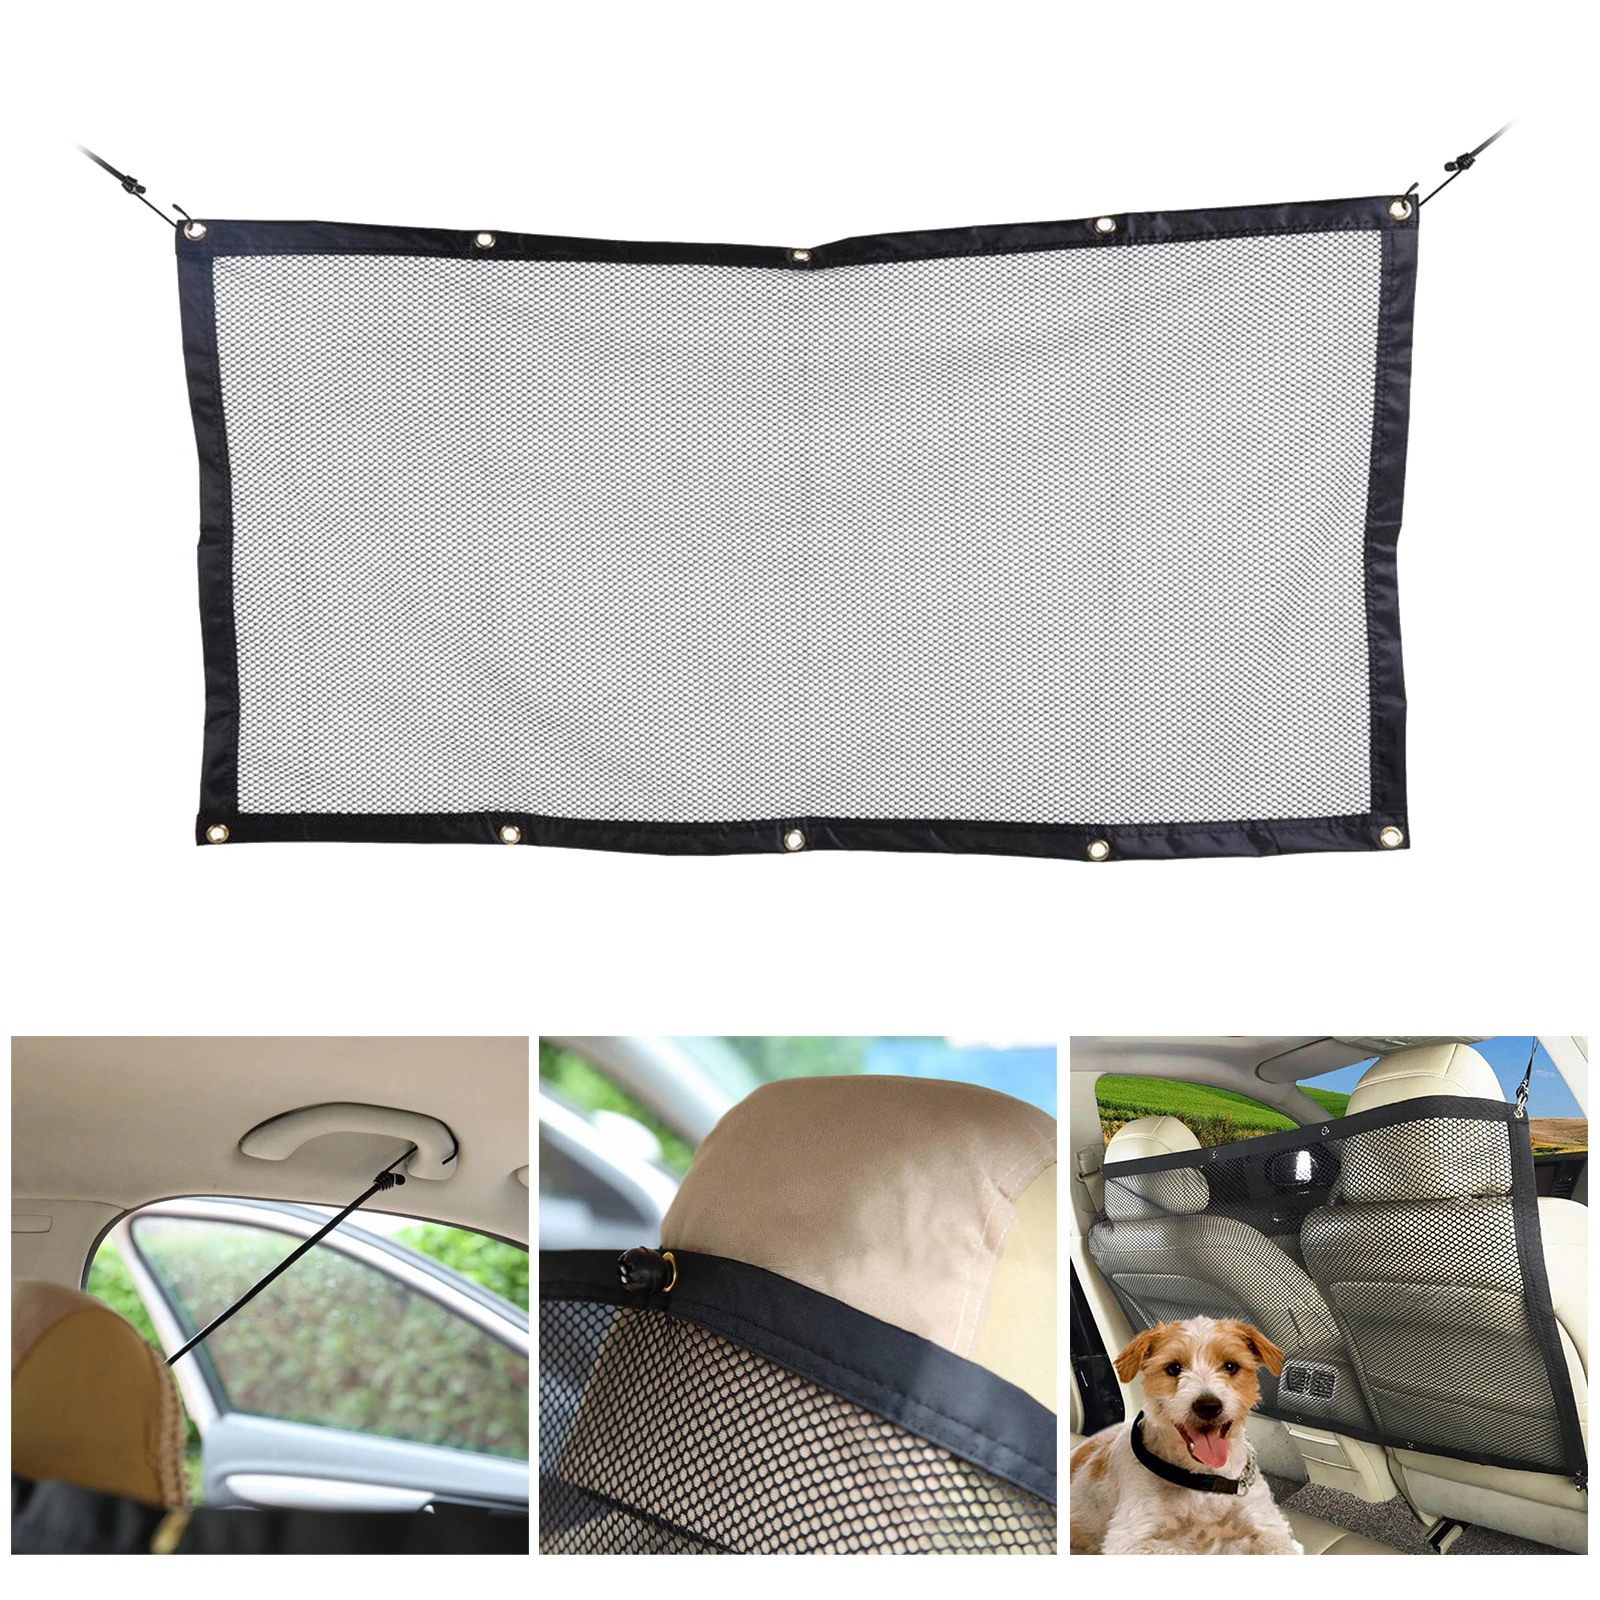 Auto Safety Car Dog Barrier Vehicle Backseat Baby Safety Divider for Pets